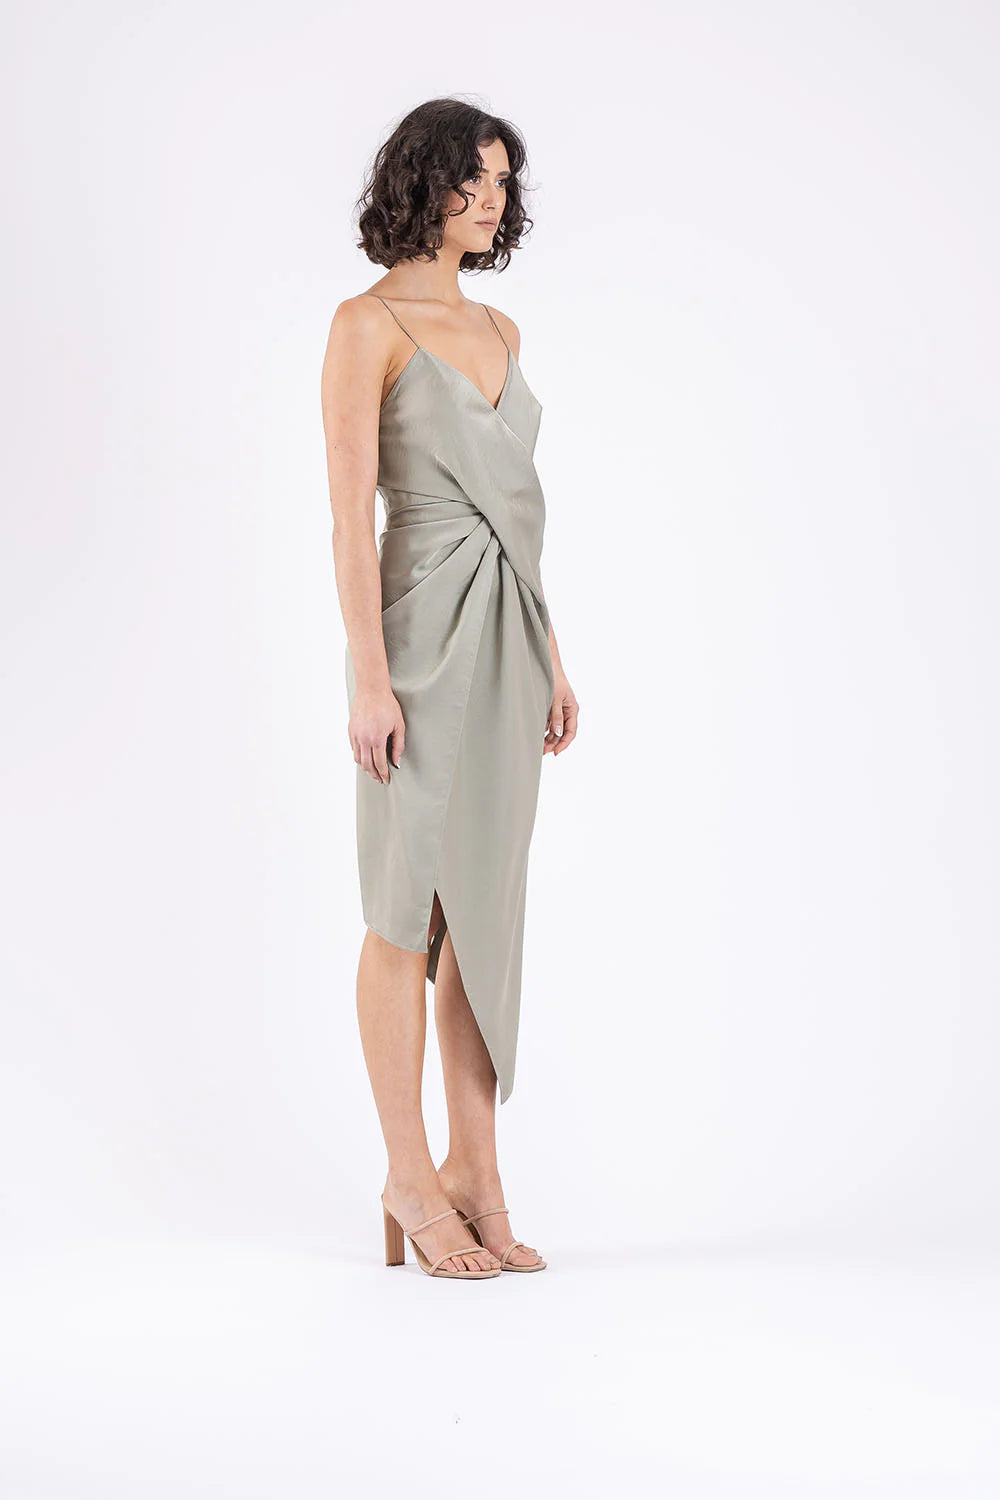 One Fell Swoop Le Luxe Midi, Serpent